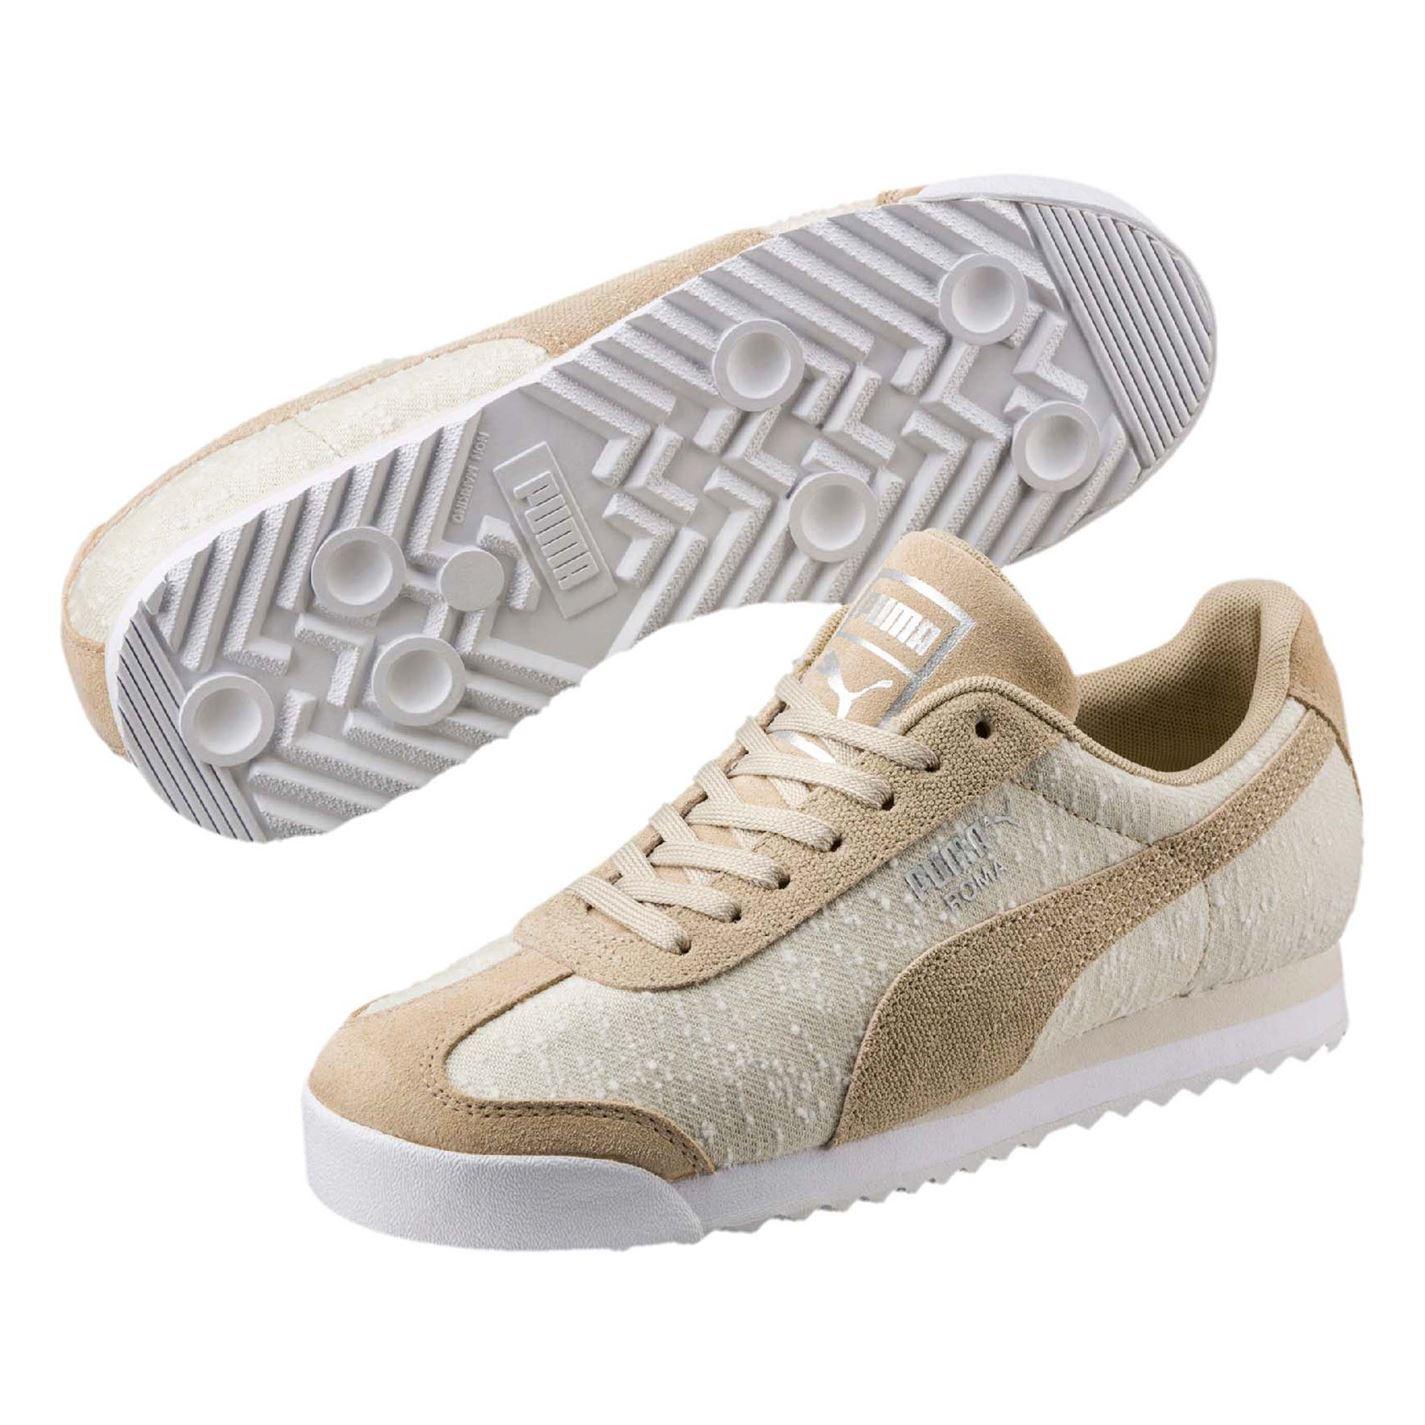 PUMA Suede Roma Pebble Trainers in 